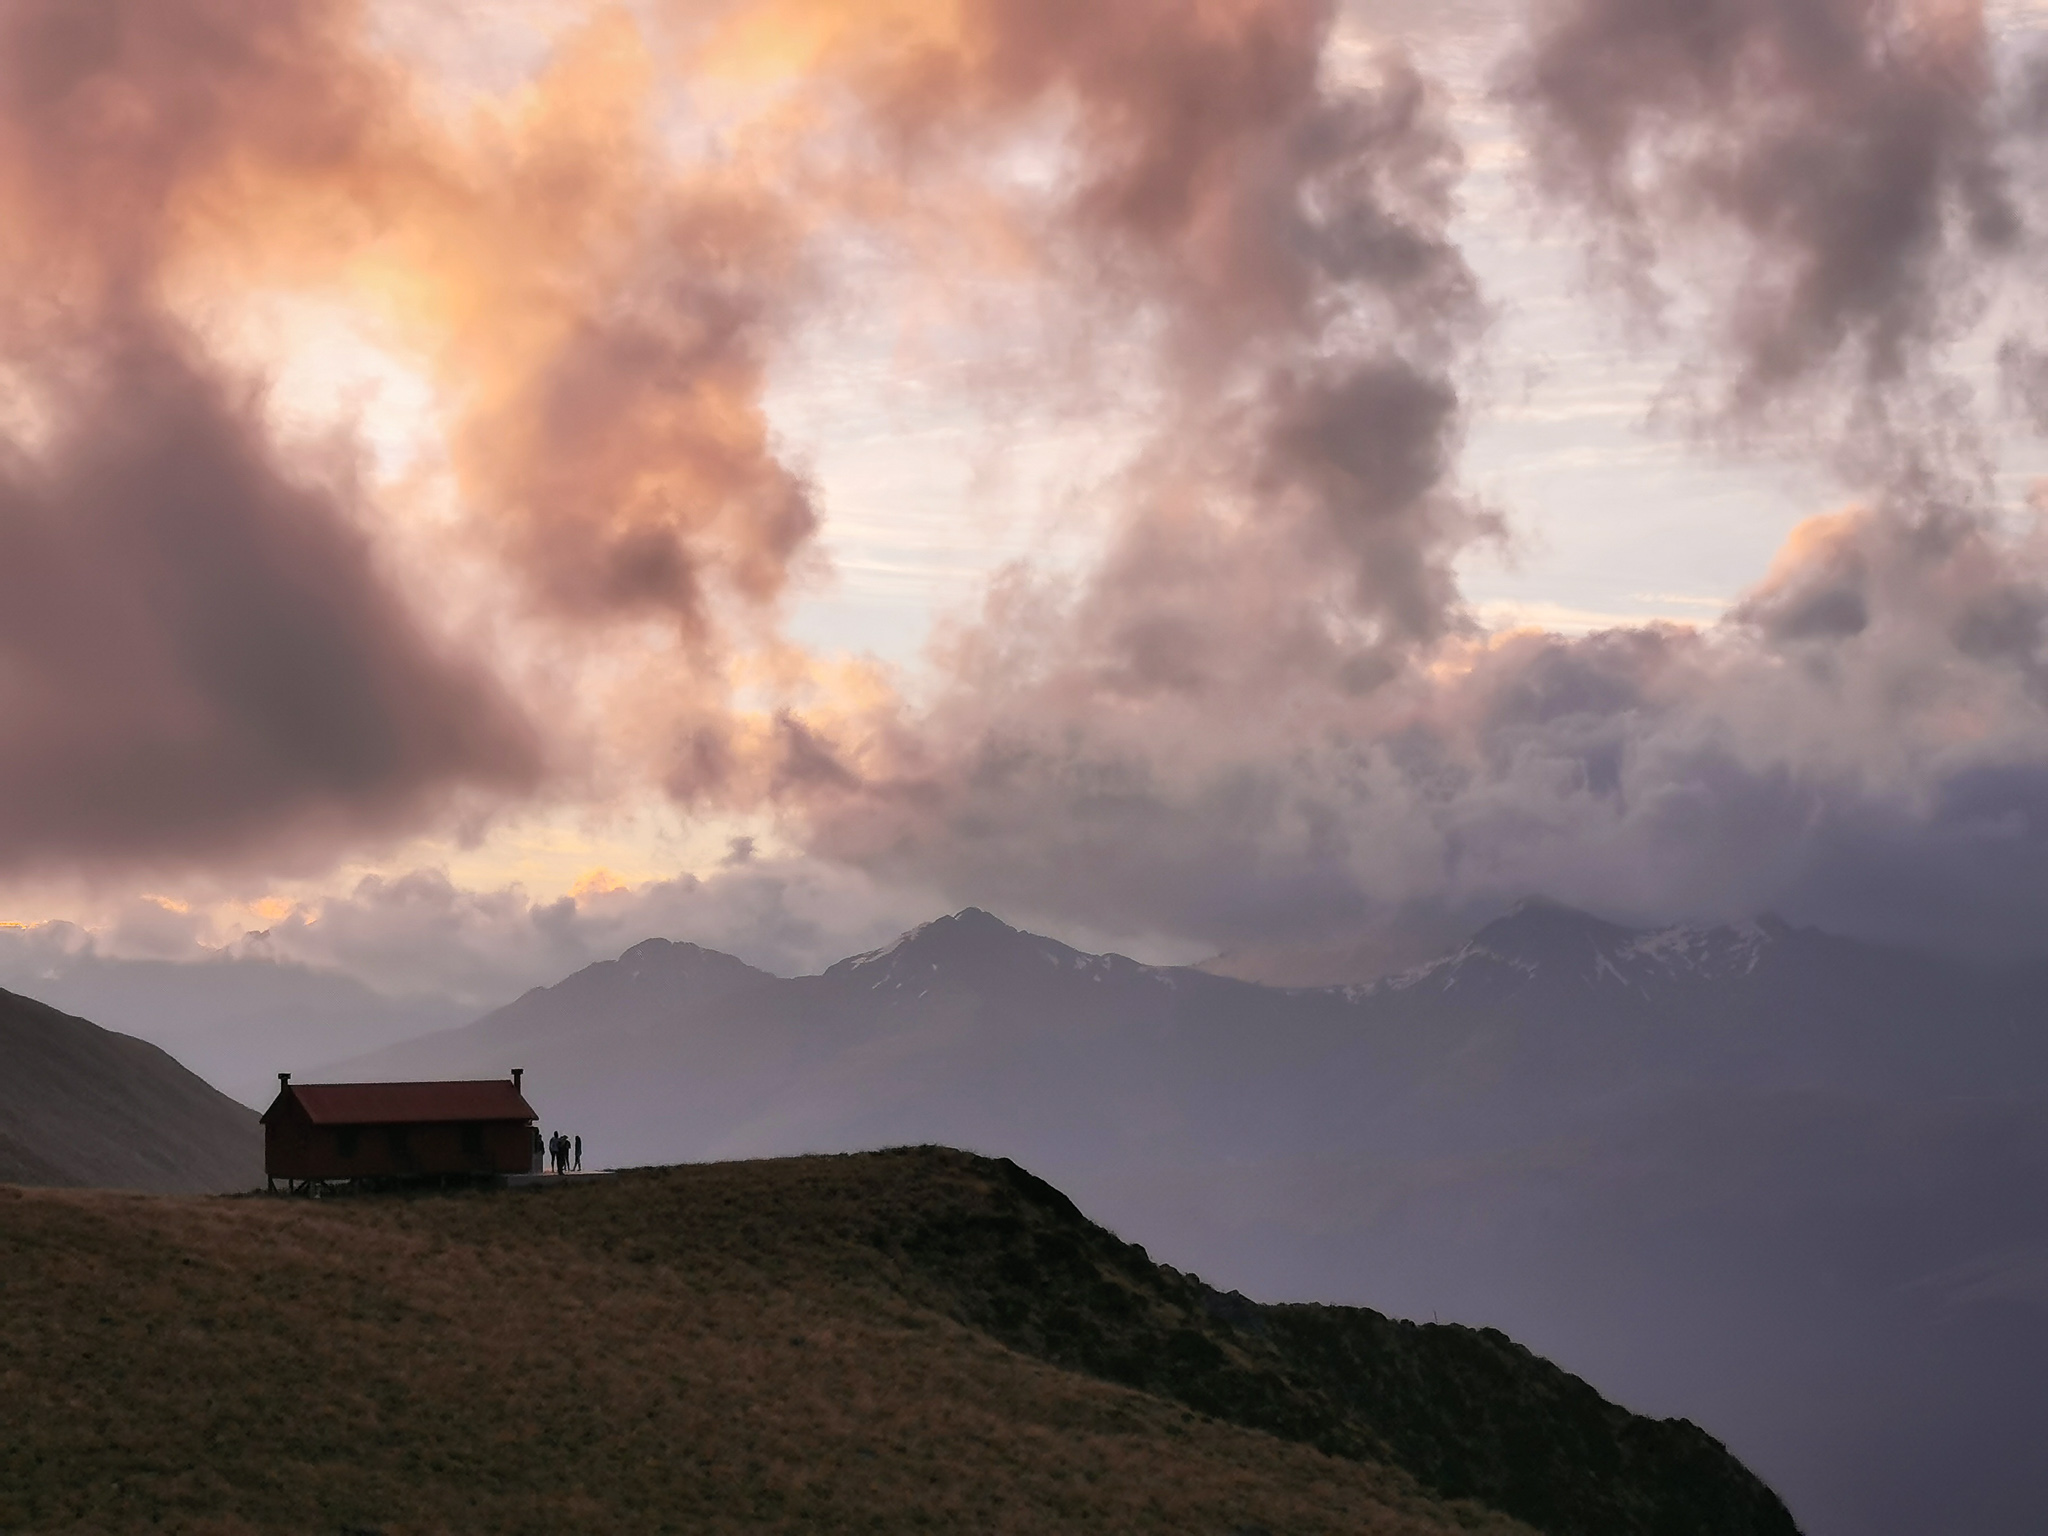 Brewster Hut with people standing on its deck silhouetted against a fiery sunset